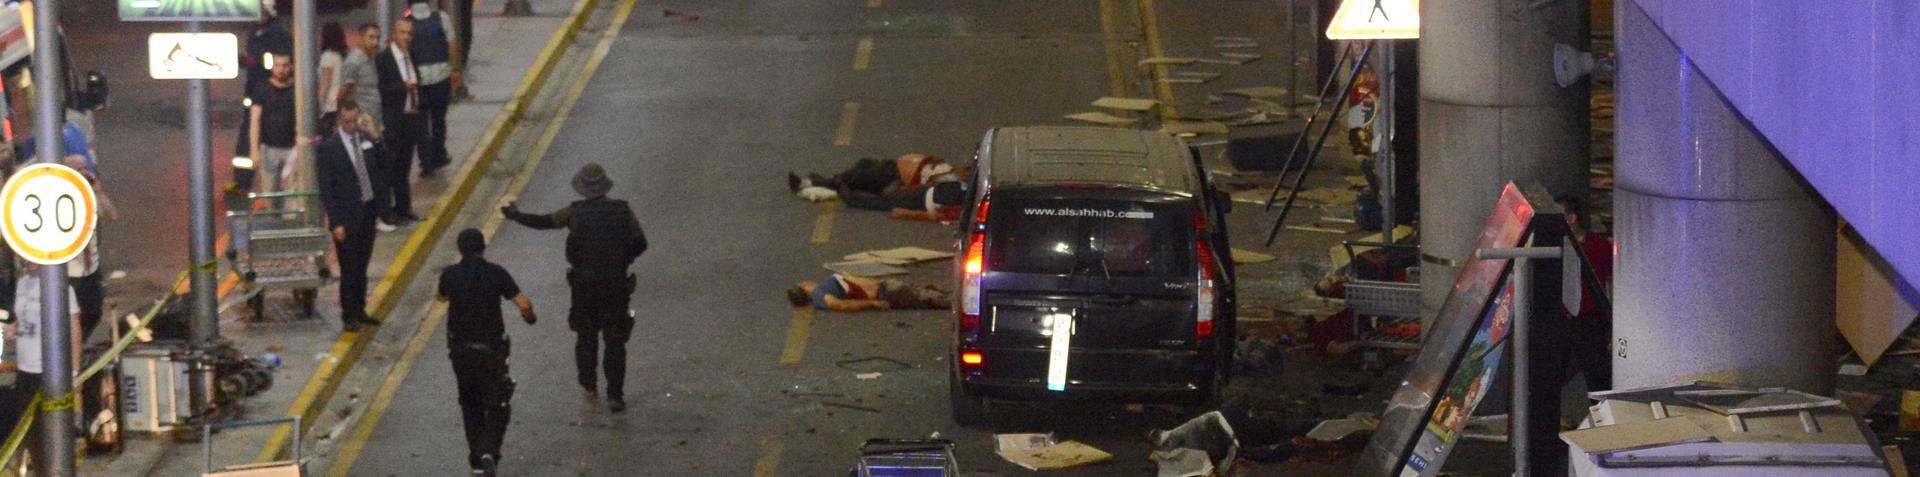 Bodies lying lifeless outside the airport where one of the bombs went off (Photo: Al Jazeera)